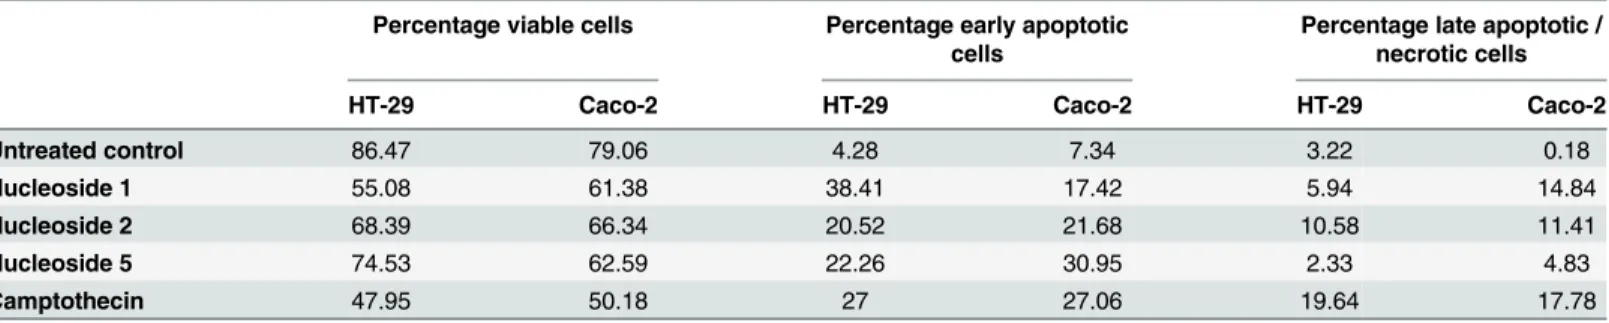 Table 2. Percentage of HT-29 and Caco-2 cells in early and late apoptosis as determined by the annexin-V assay.